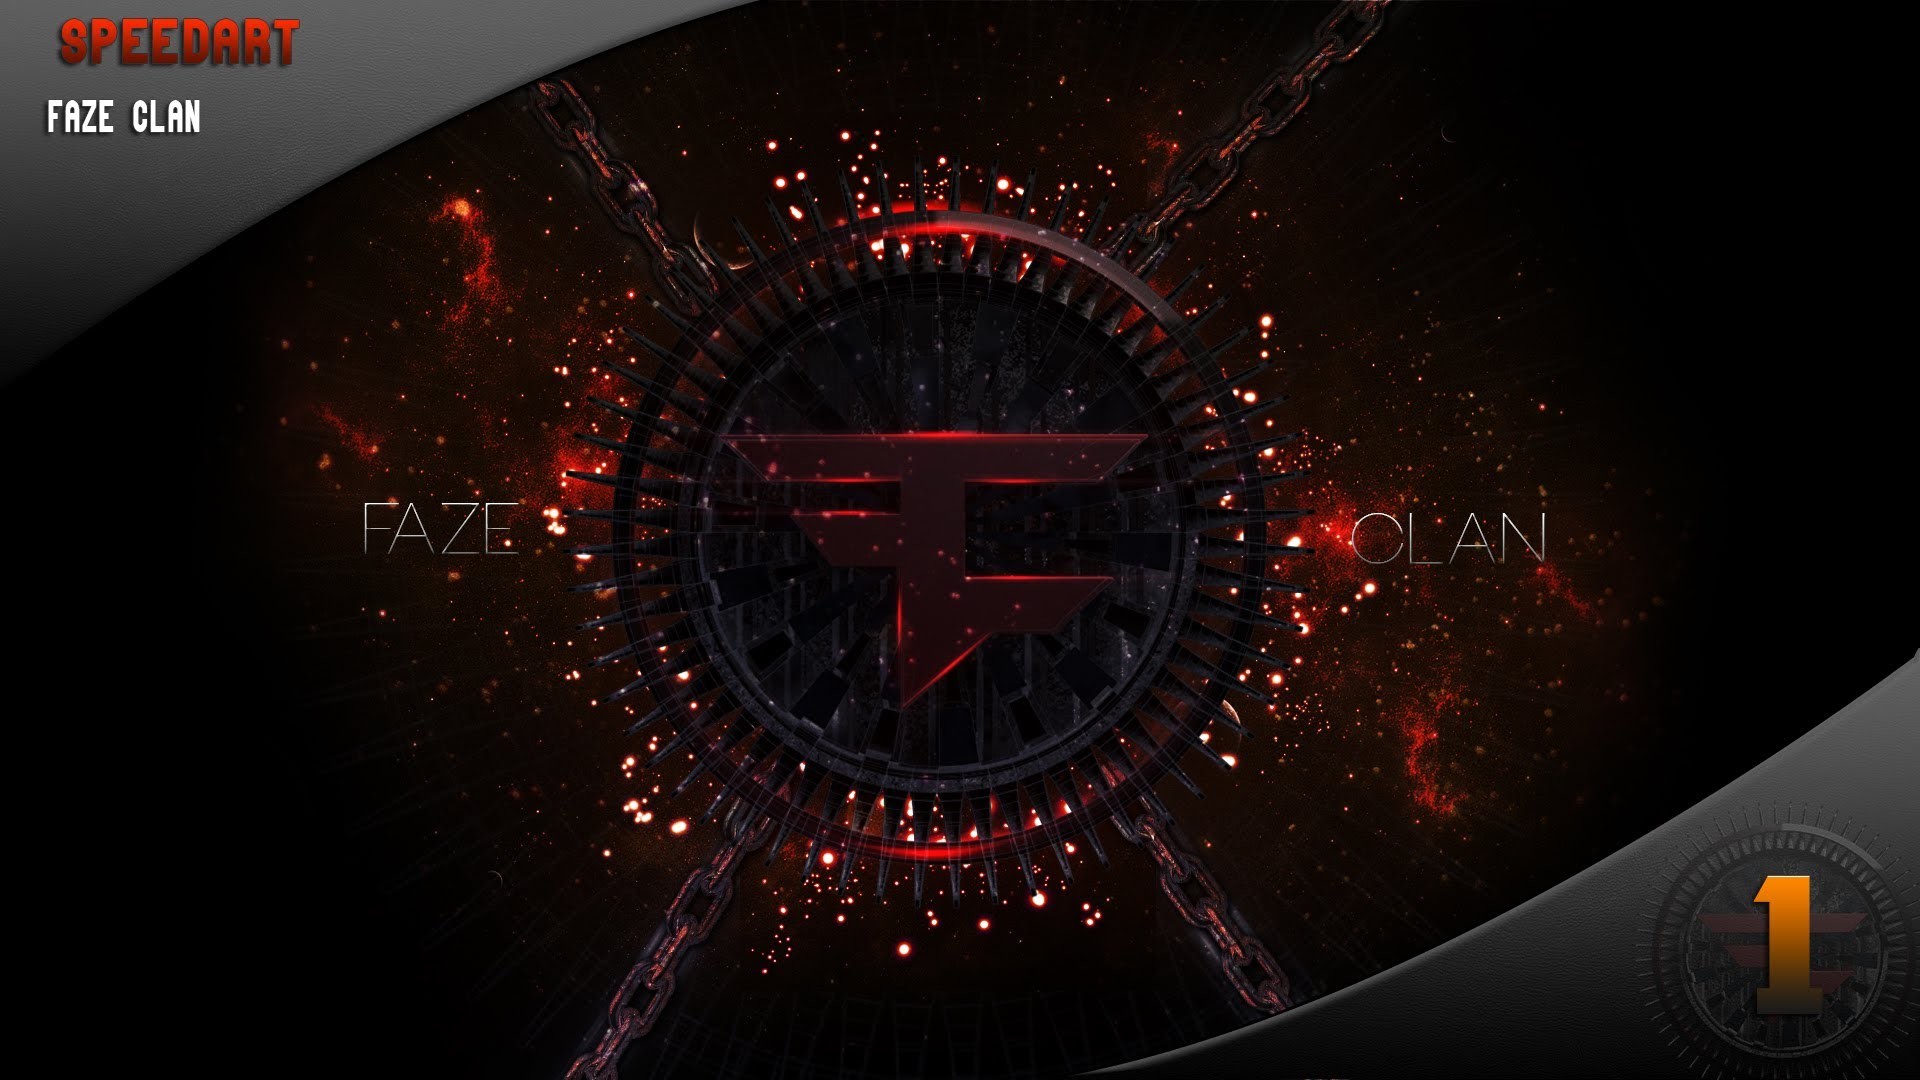 1920x1080 YouTube FaZe Clan submited images.